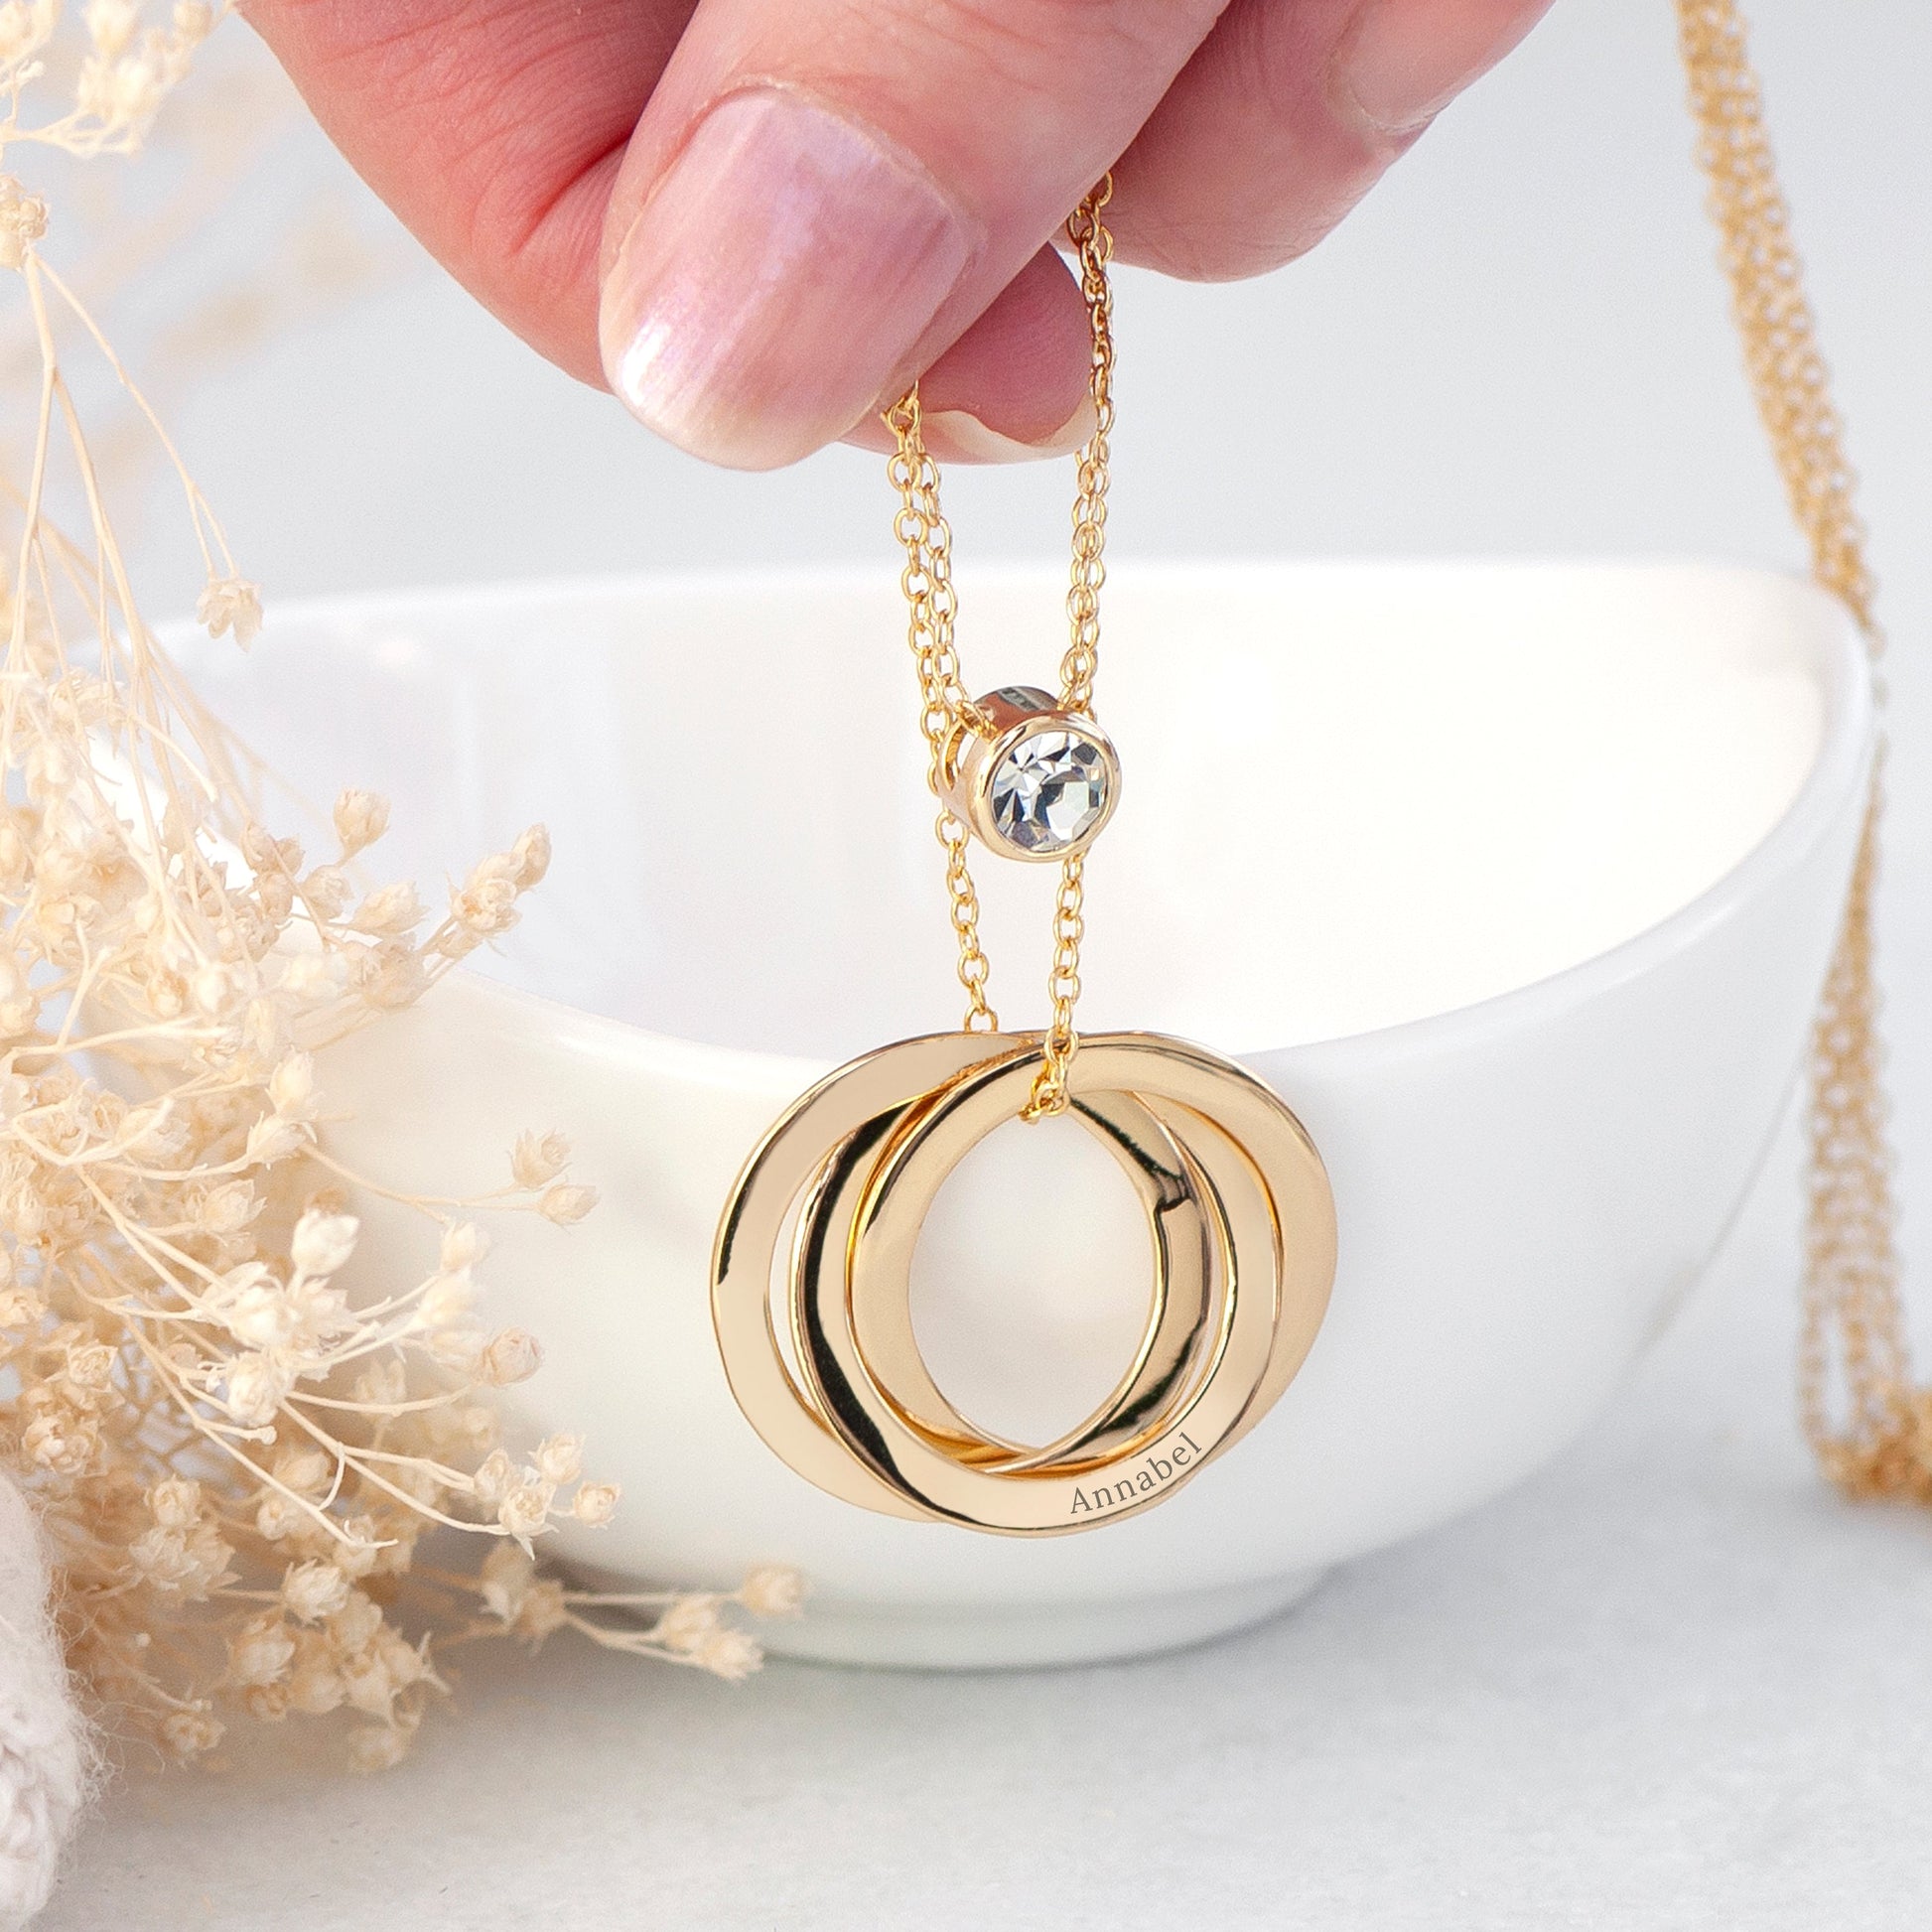 Personalized Necklaces - Personalized Russian Ring Layered Necklace 